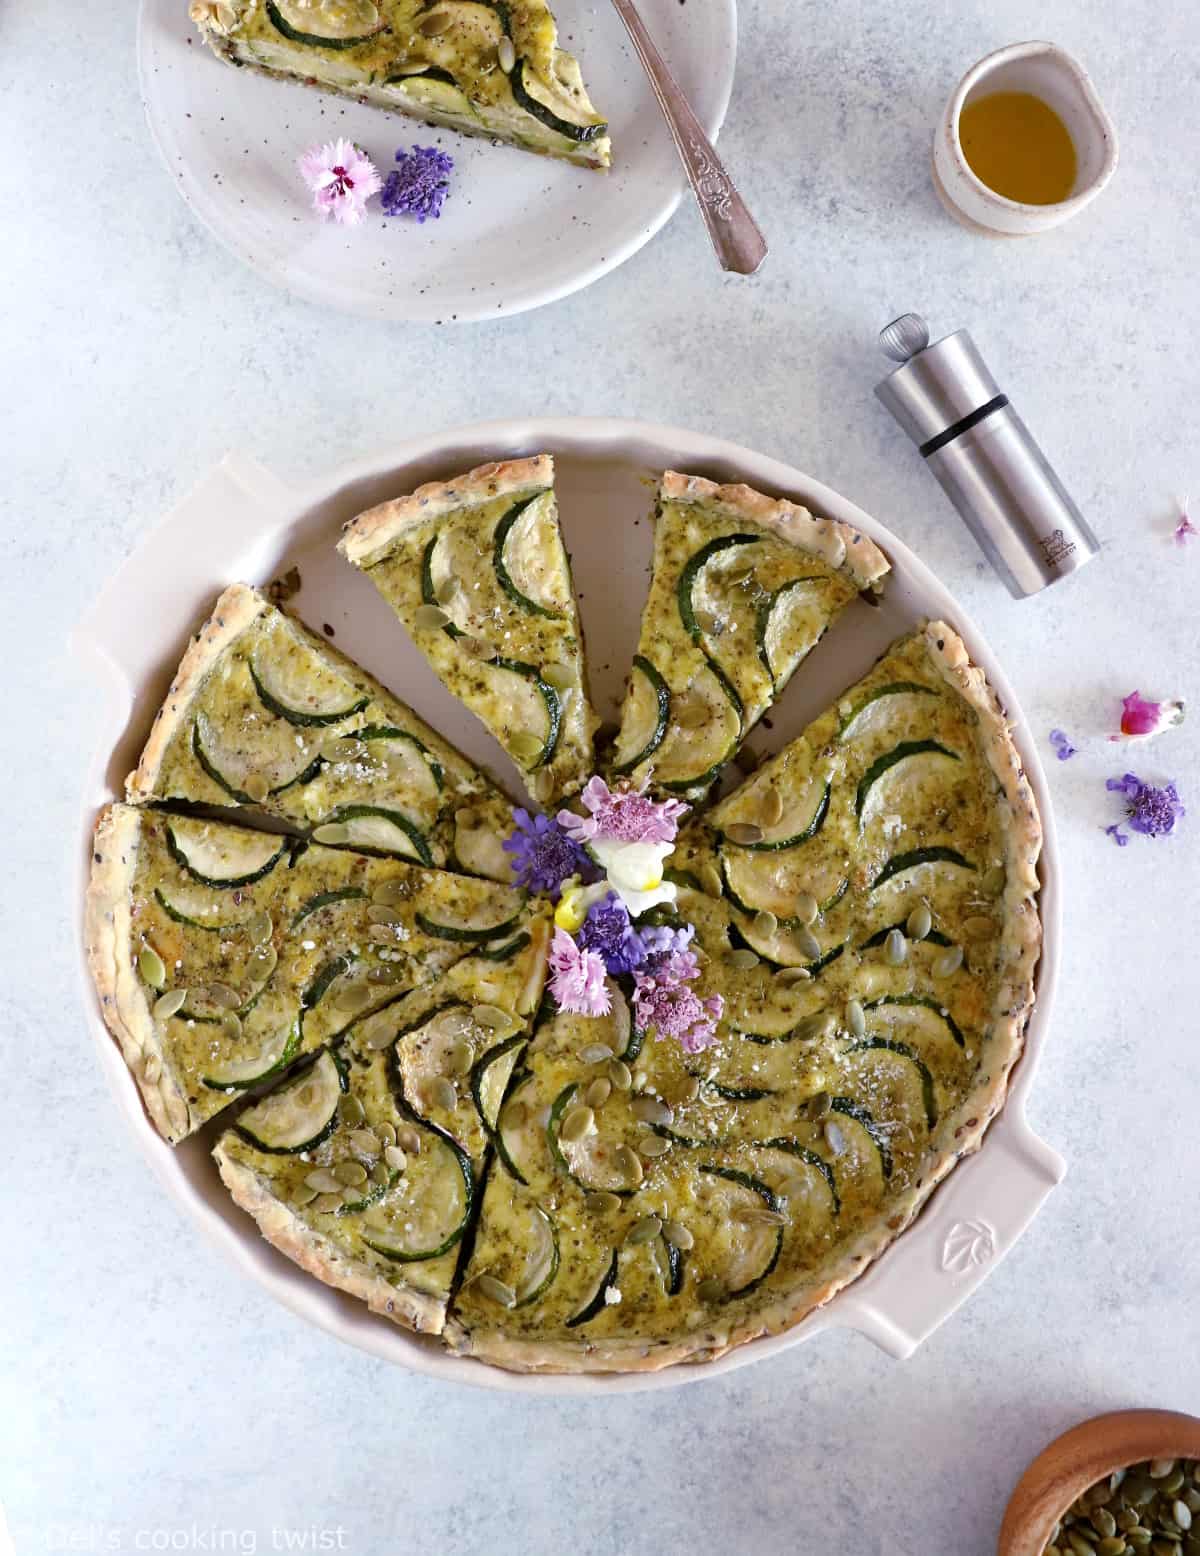 This delicious zucchini quiche features fresh goat cheese, pesto, and a subtle pie crust with seeds.